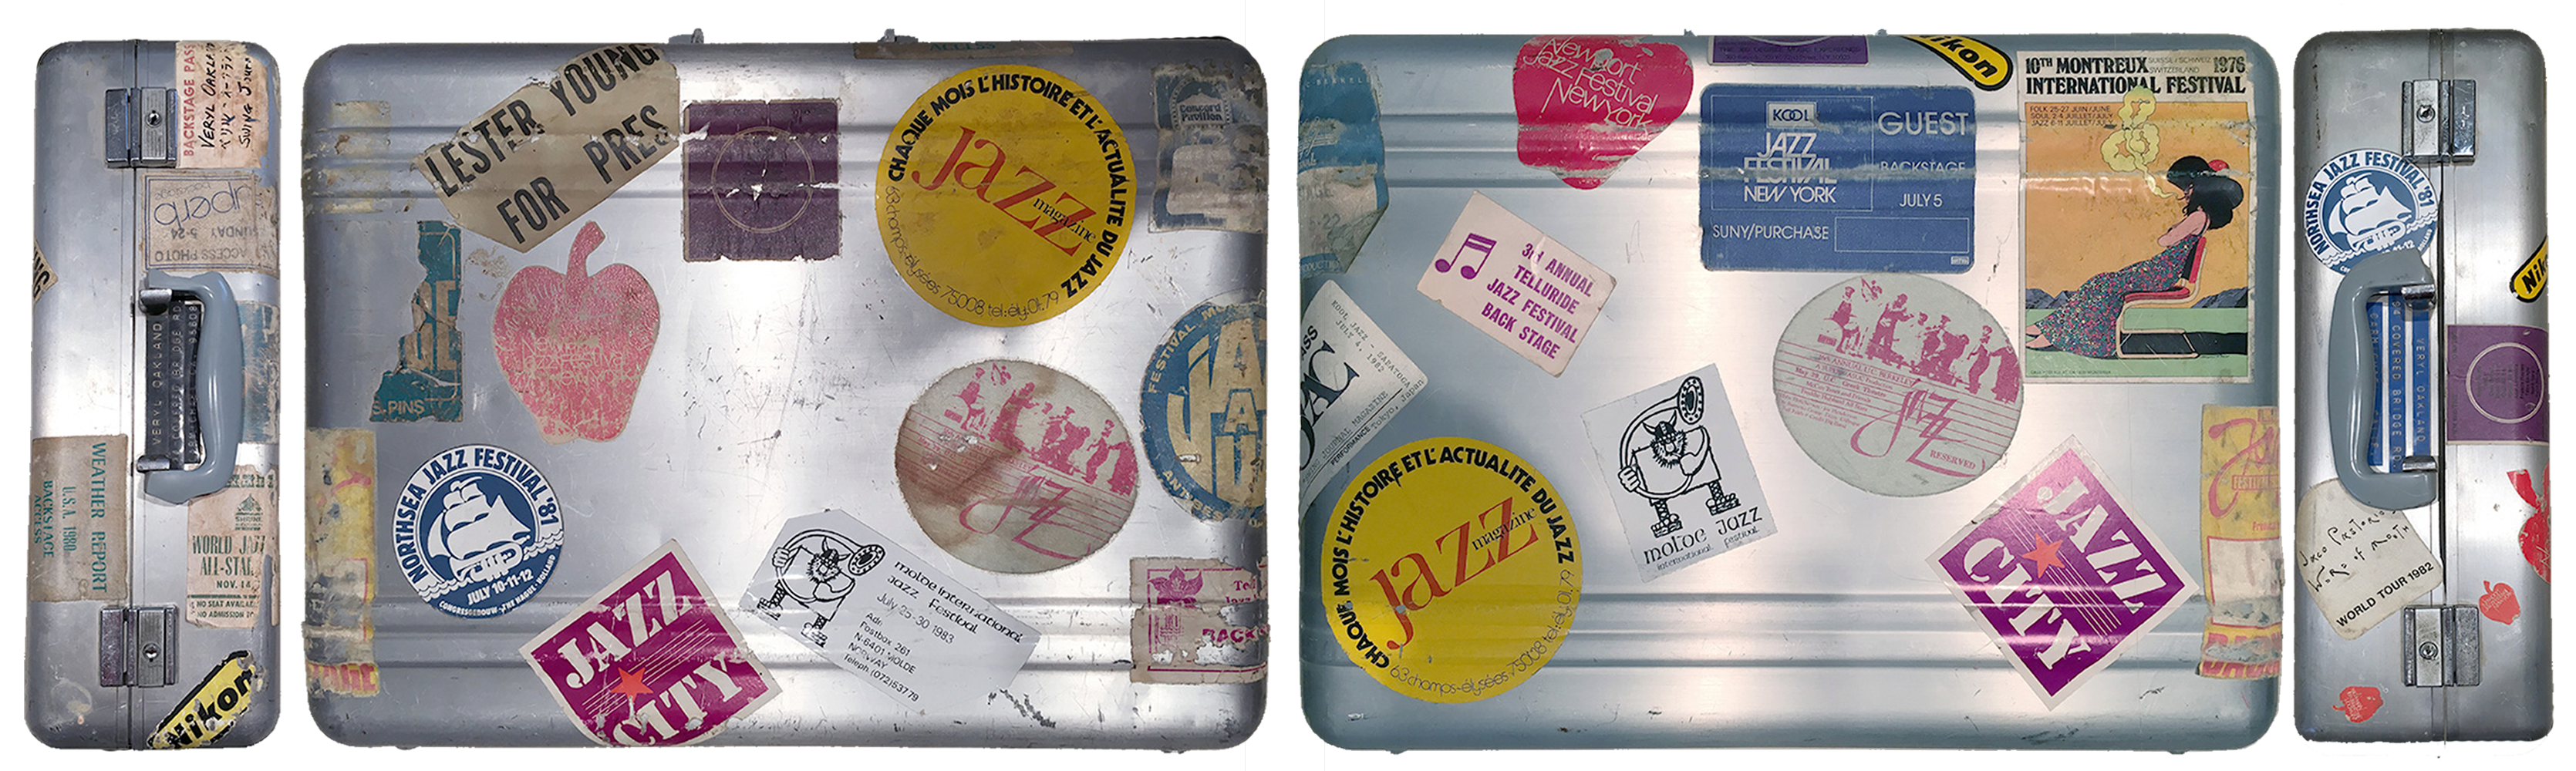 Silver camera case covered in travel stickers, owned and used by Veryl Oakland.